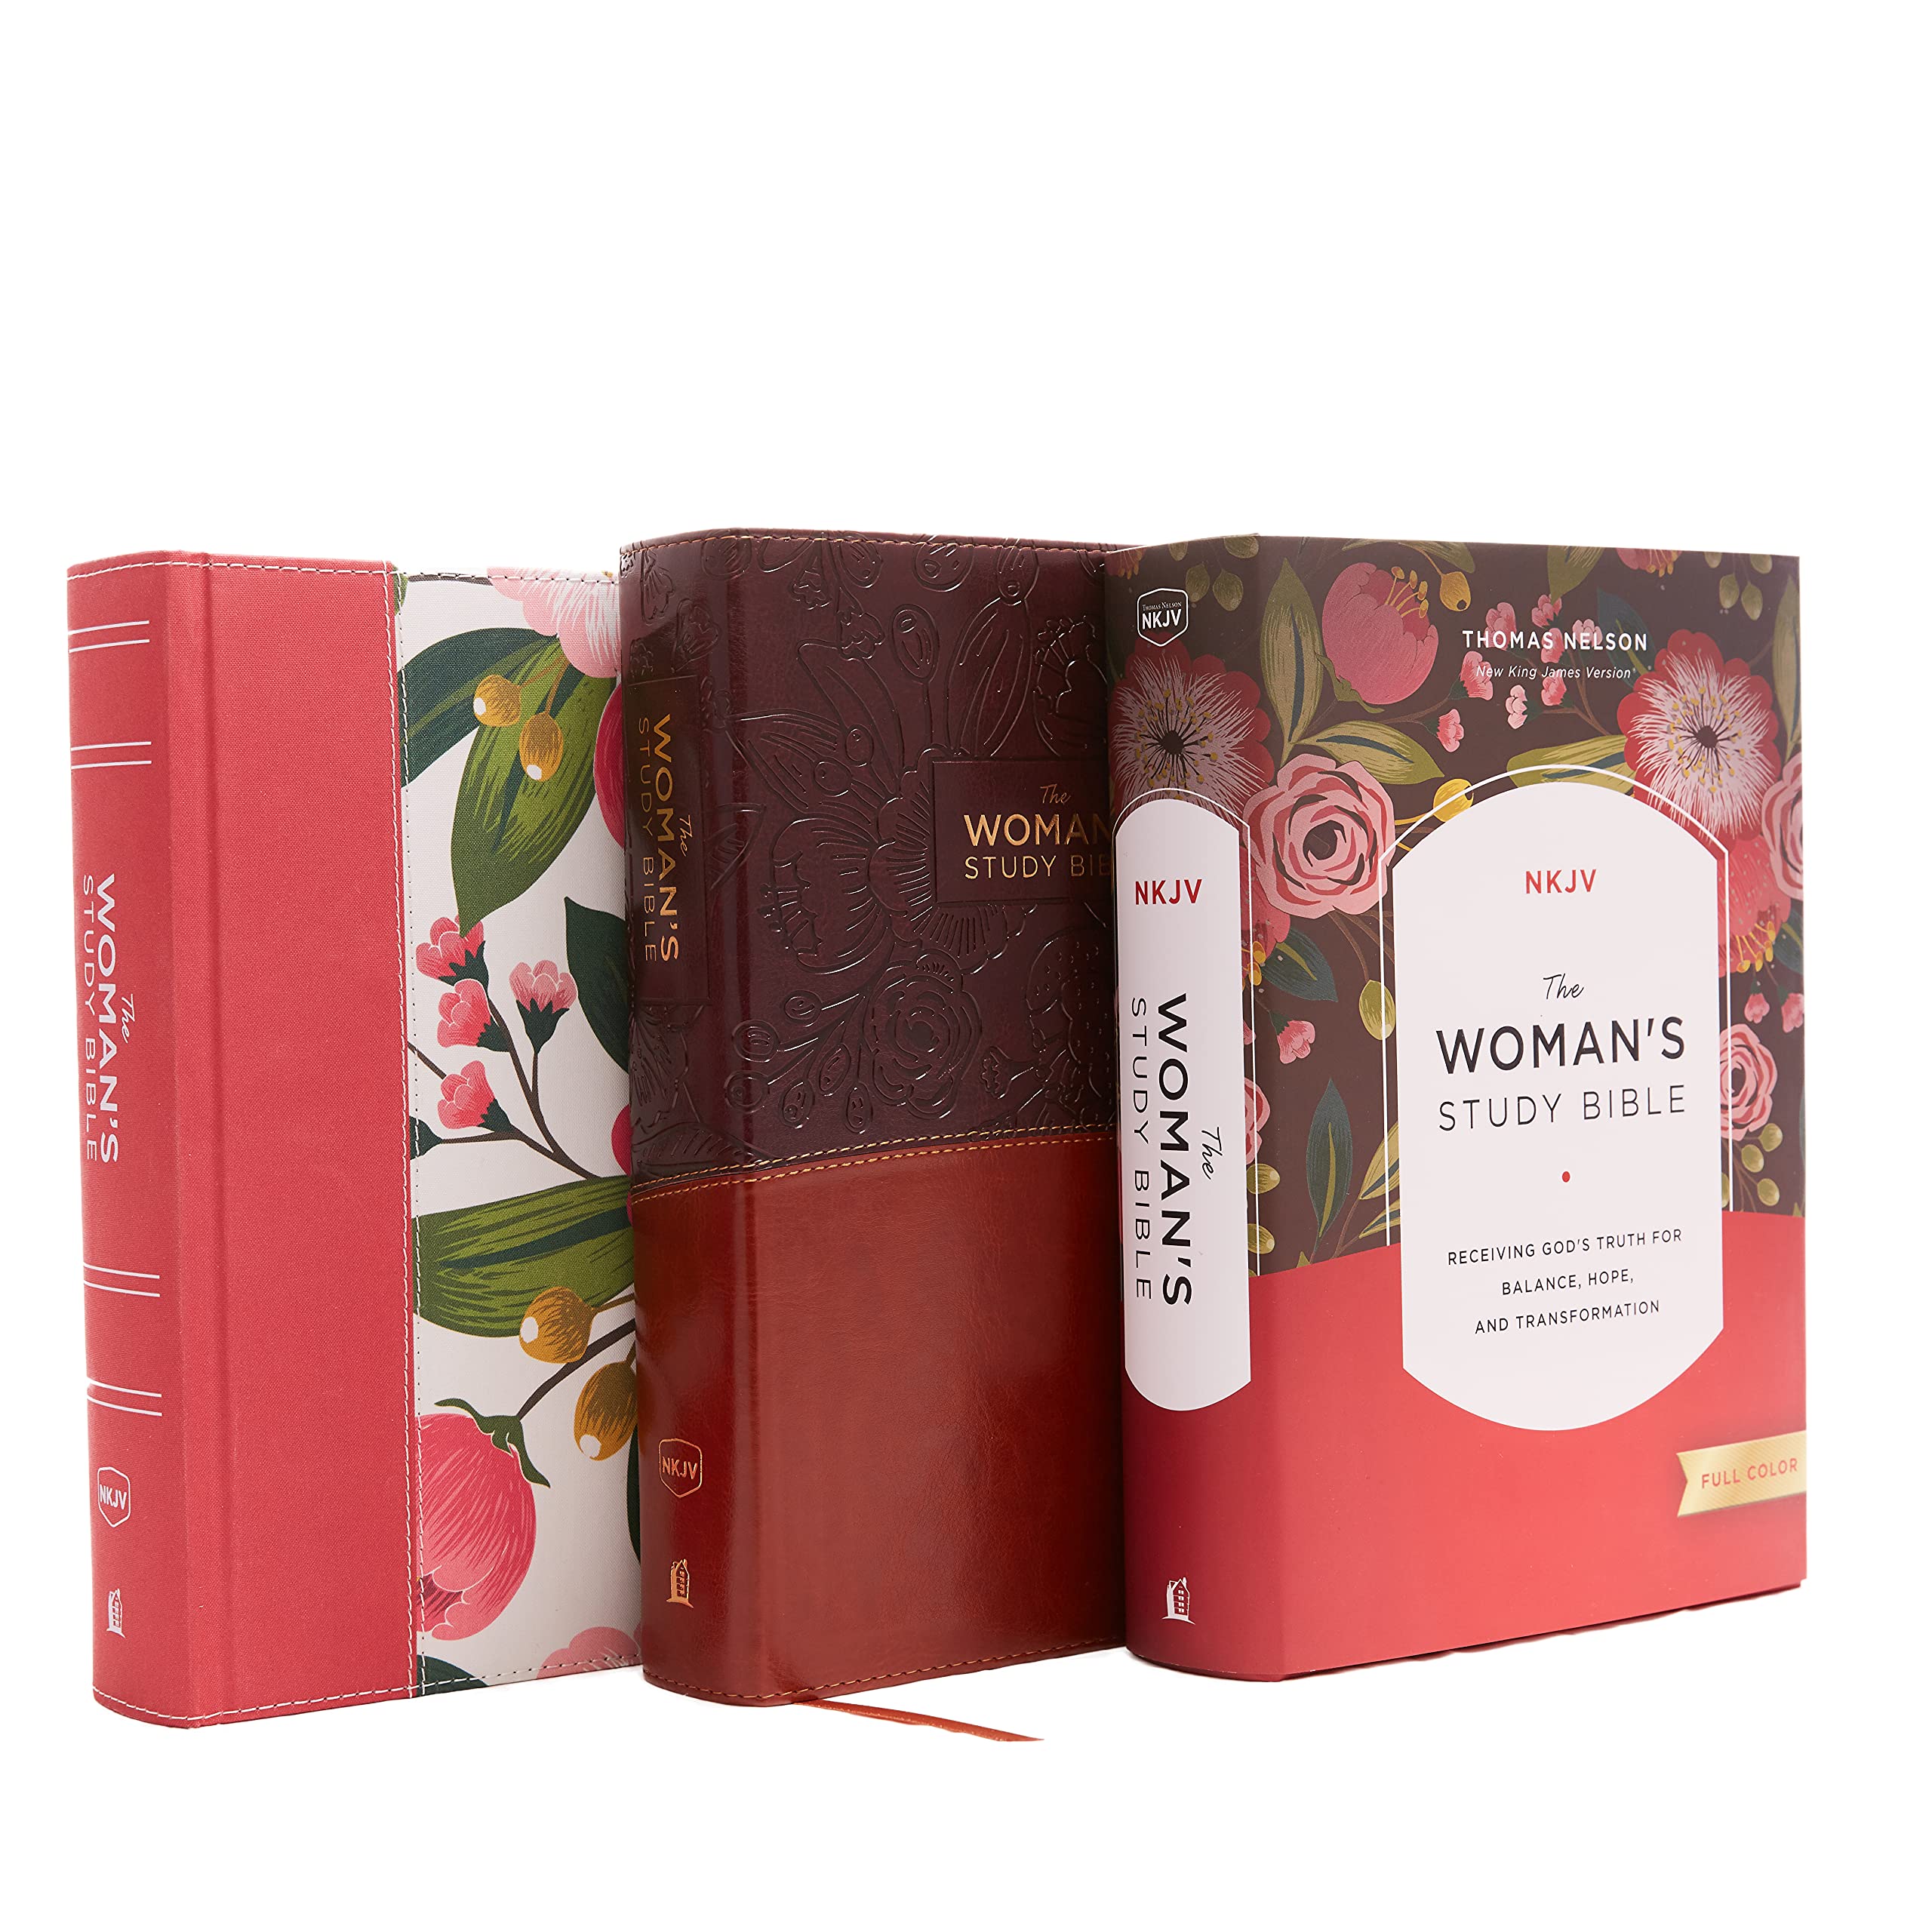 NKJV, The Woman's Study Bible, Hardcover, Red Letter, Full-Color Edition: Receiving God's Truth for Balance, Hope, and Transformation